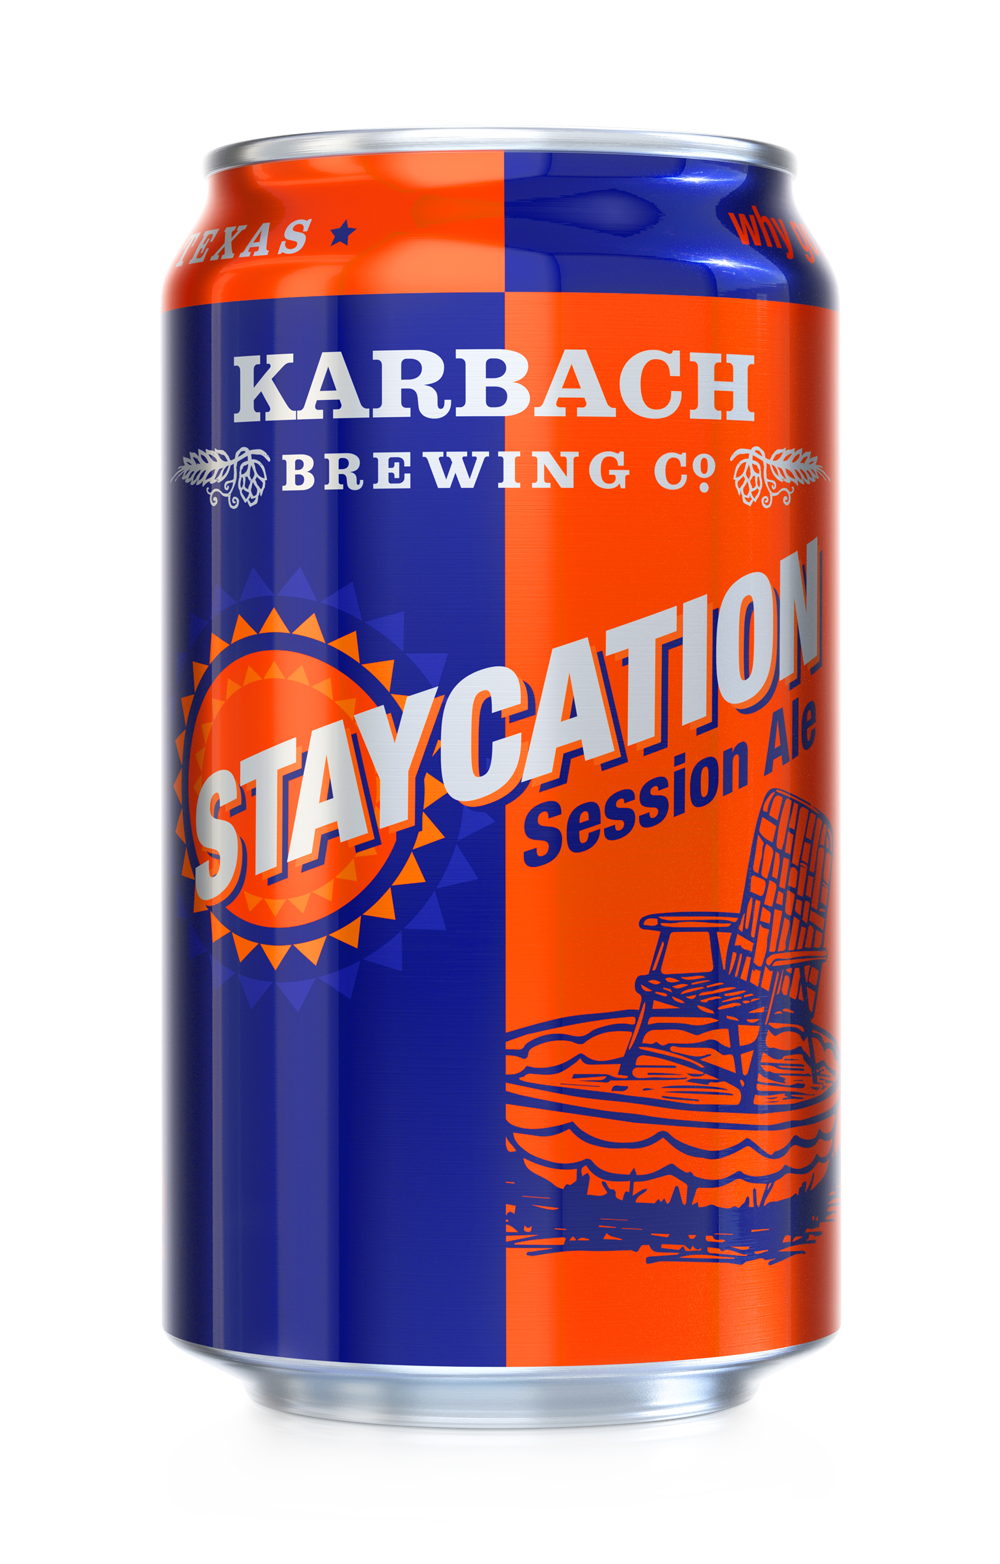 Staycation Session Ale